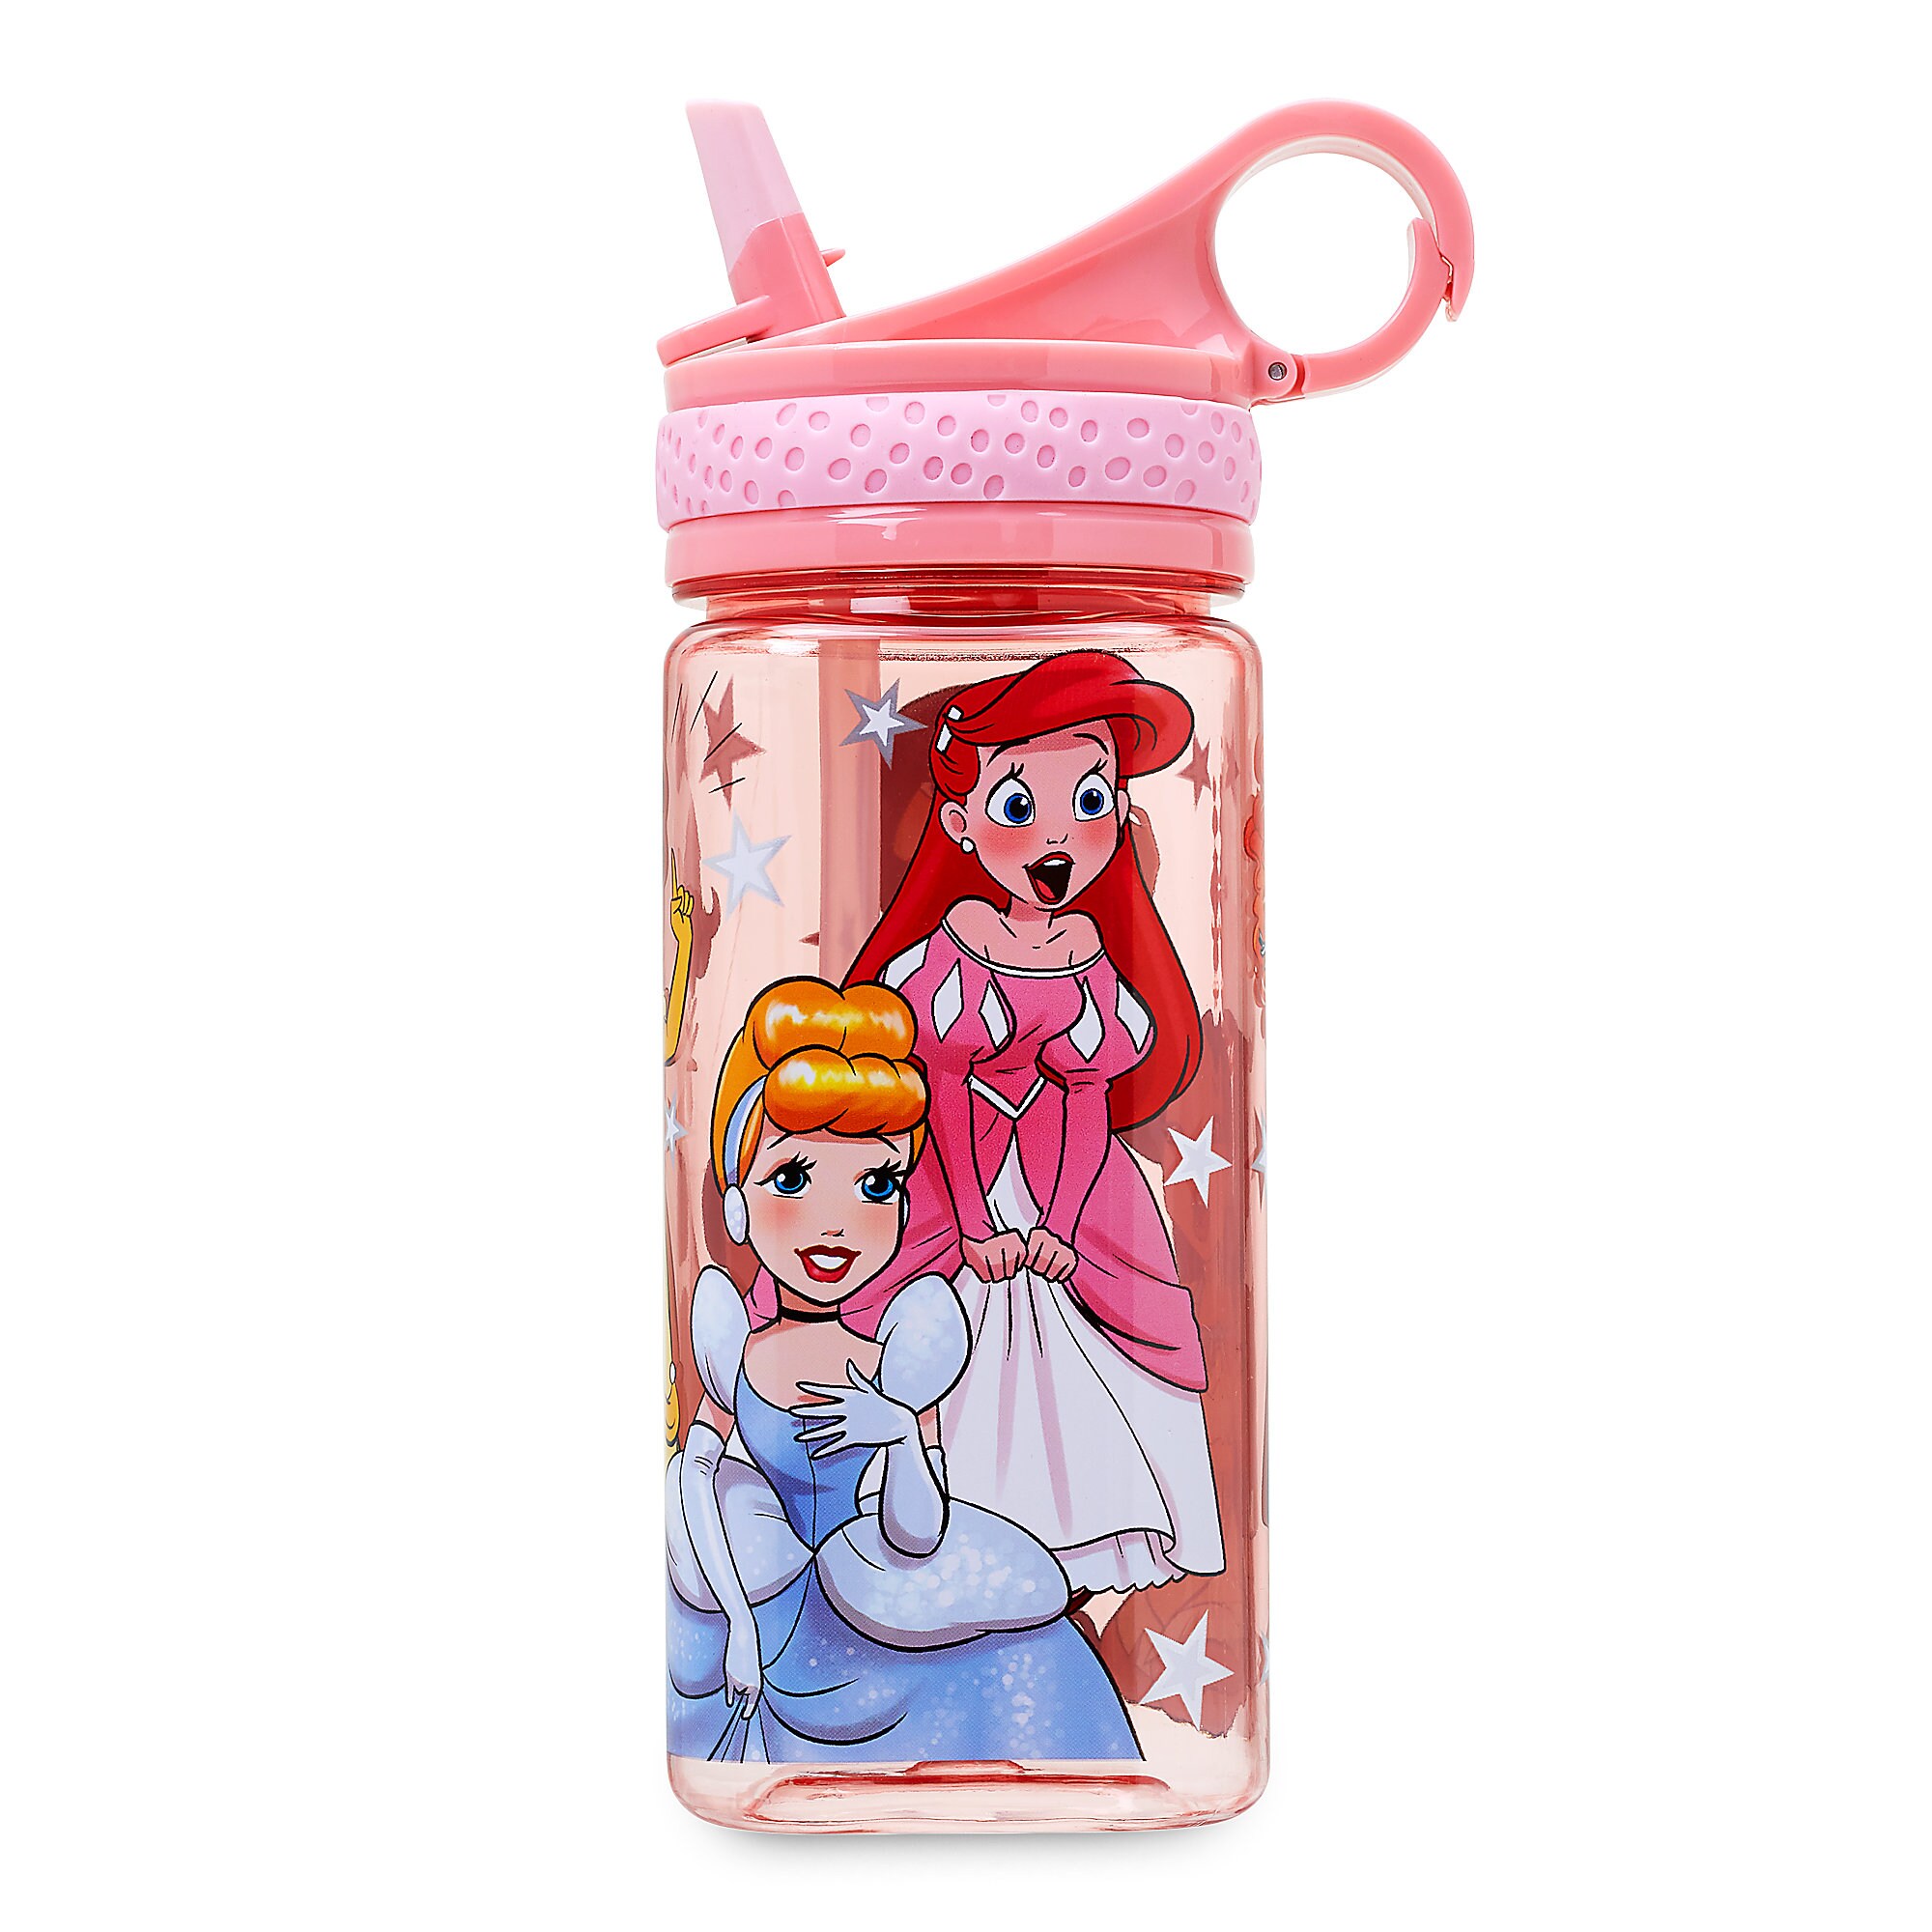 Disney Princess Water Bottle with BuiltIn Straw is here